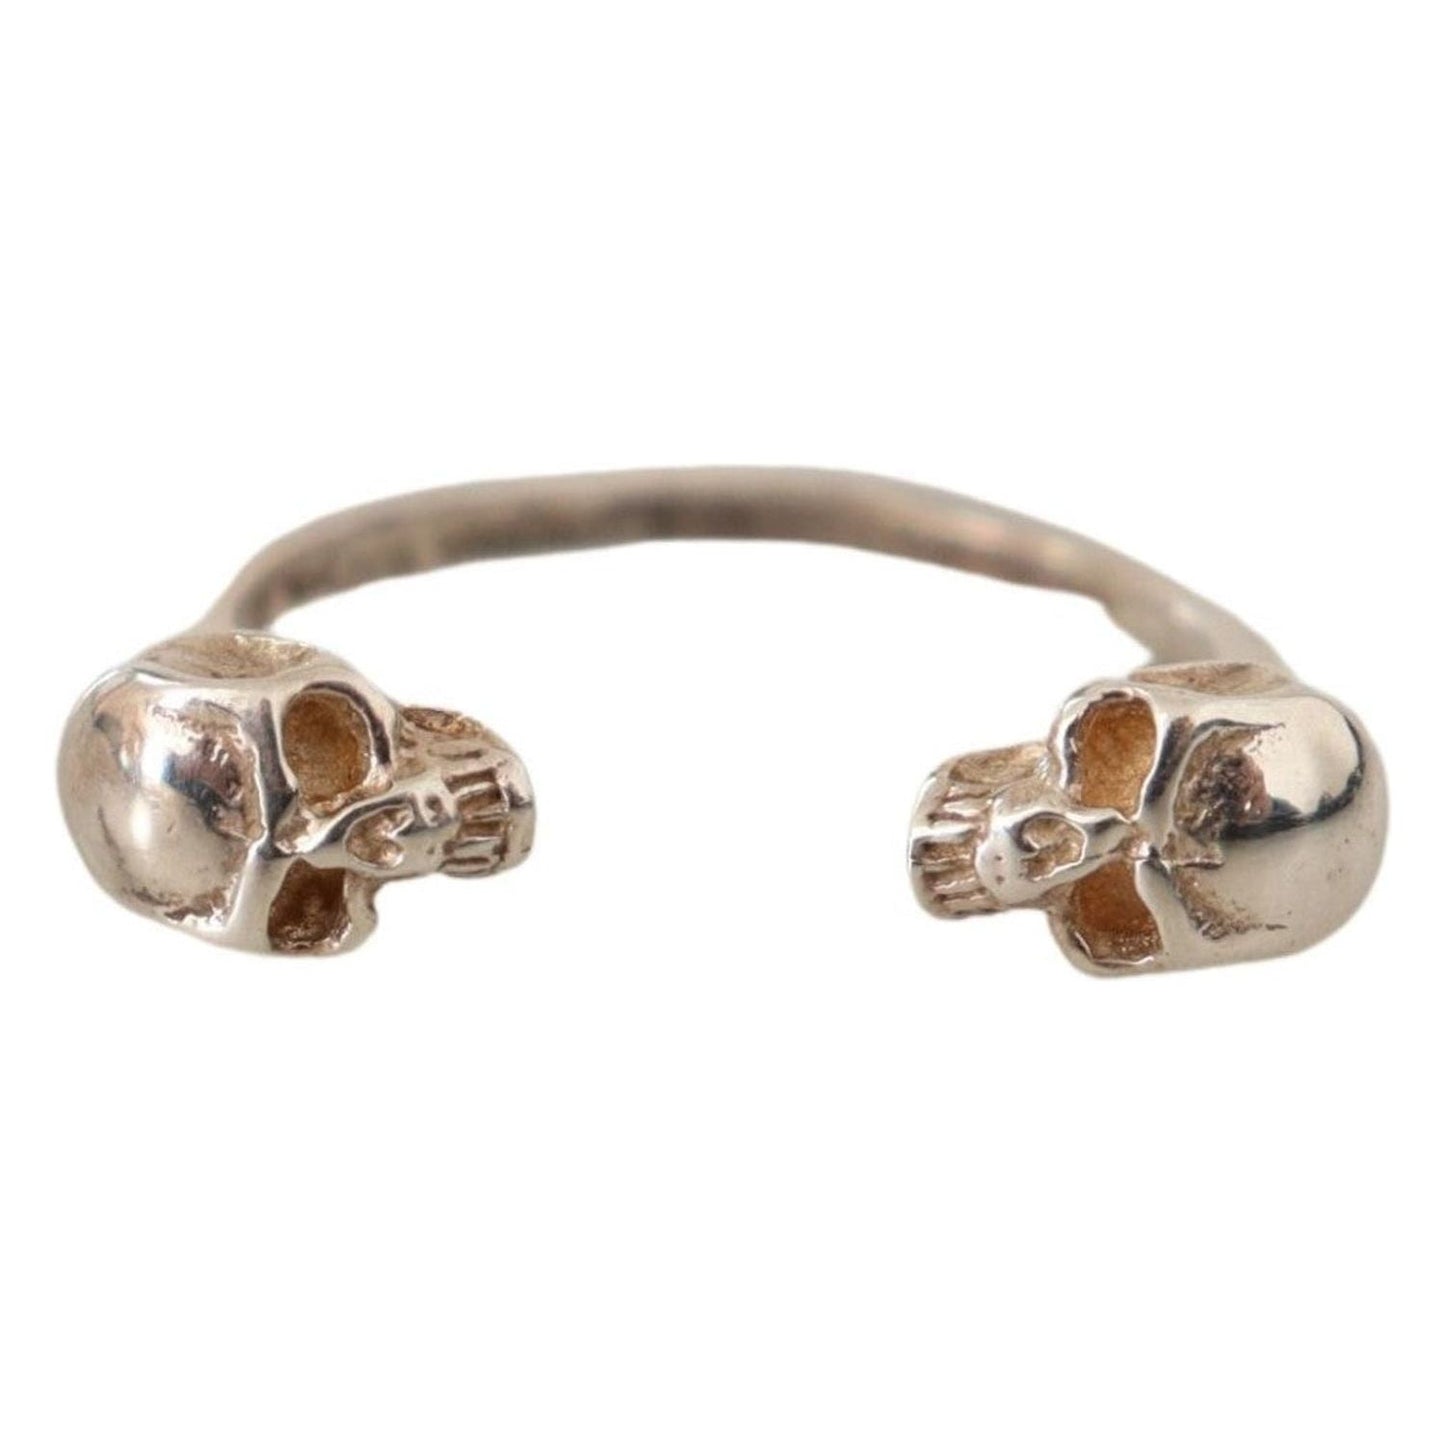 Nialaya Exquisite Silver Skull Statement Ring Ring antique-silver-tone-skull-men-jewelry-ring